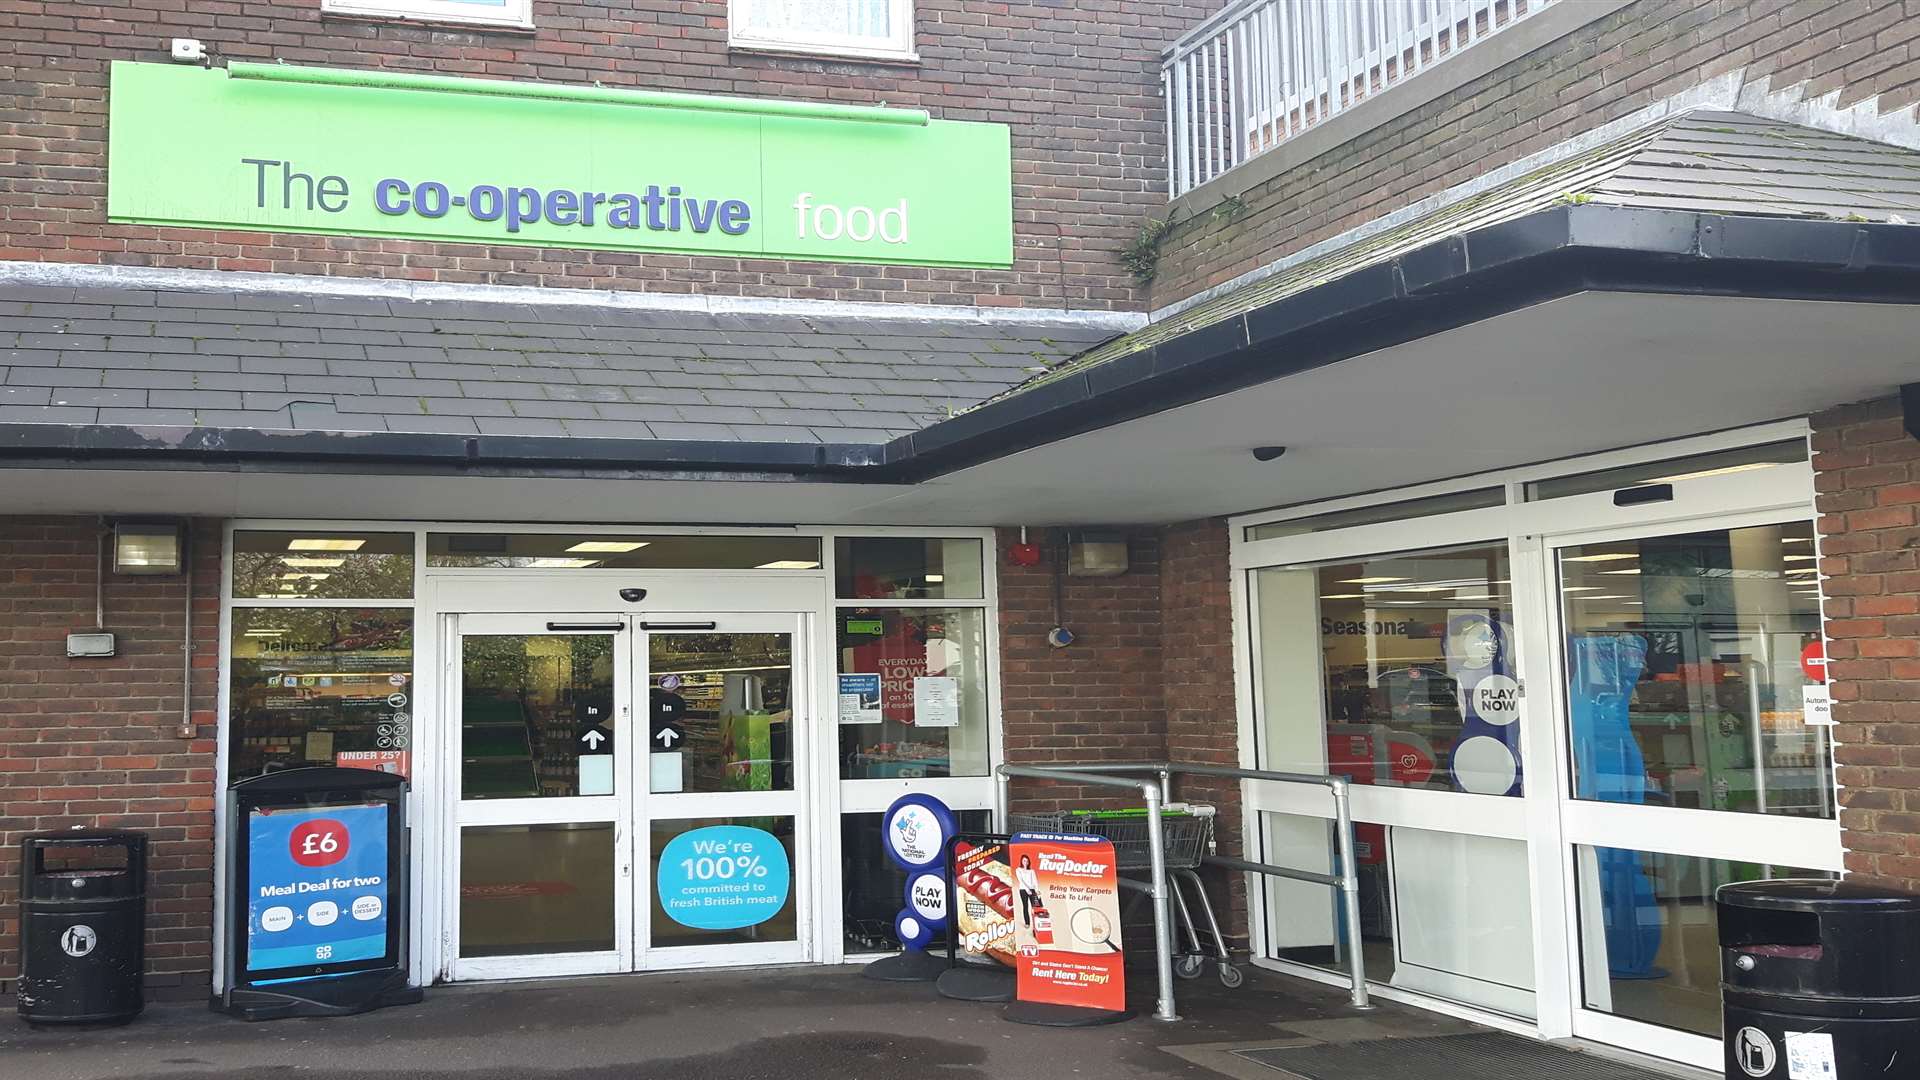 The Co-op in Park Street has been bought by Aldi